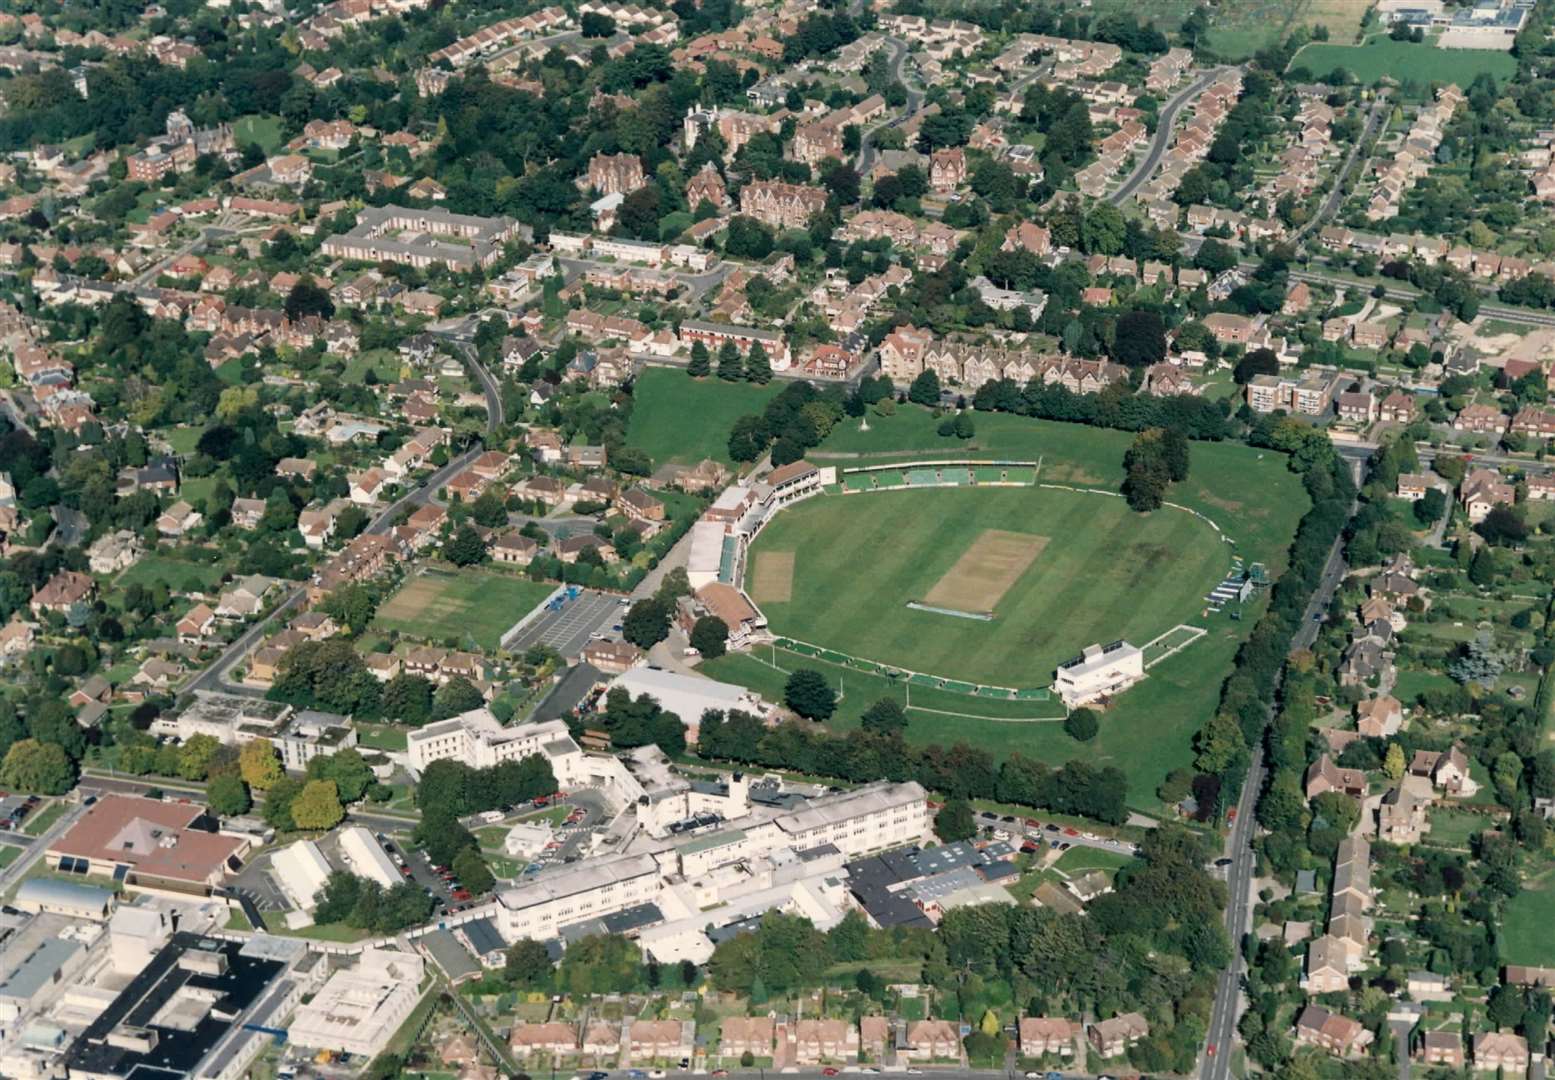 St Lawrence Ground, Canterbury, pictured in September 1995. The famous lime tree can be seen near to the boundary.